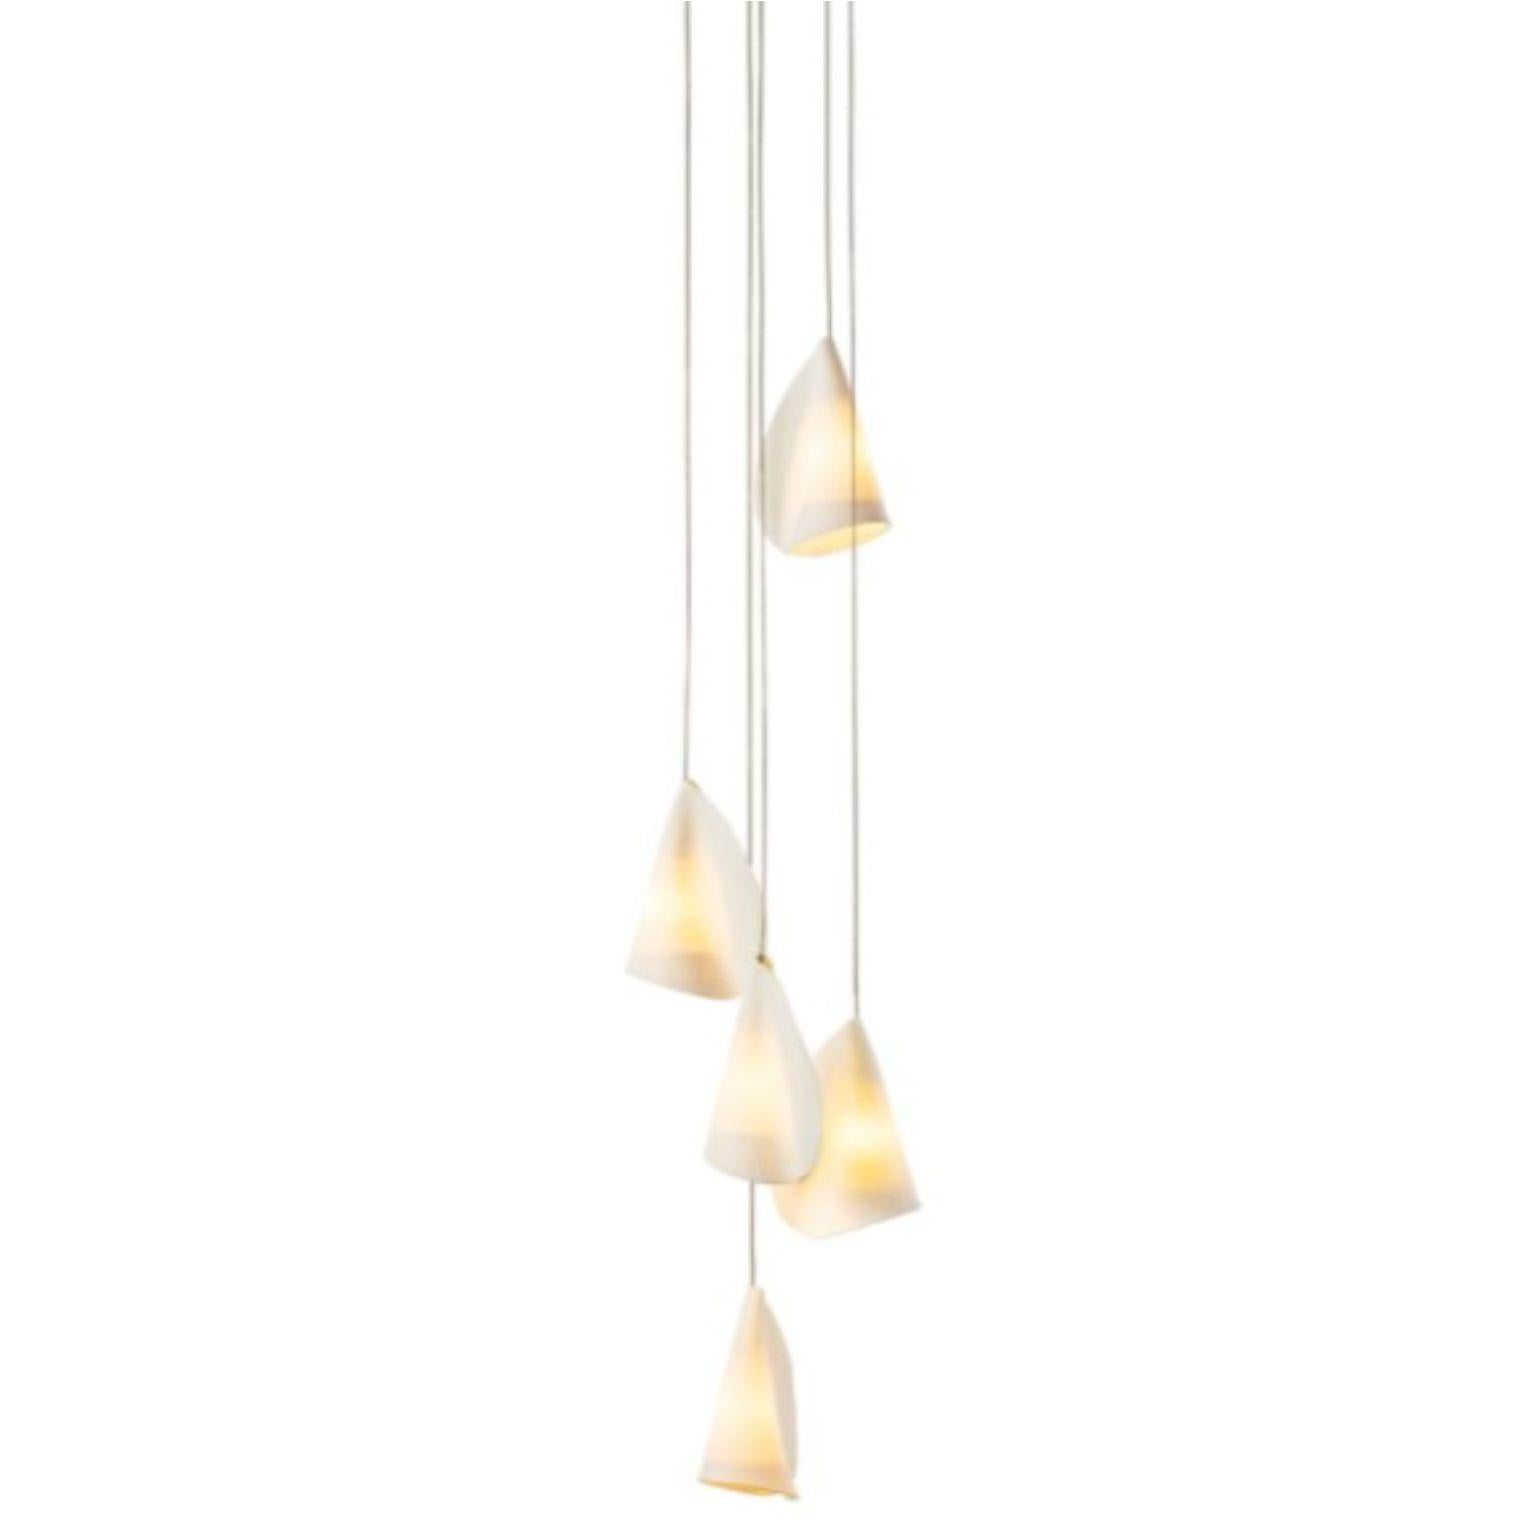 21.5 Pendant by Bocci
Dimensions: D 15.2 x H 300 cm
Materials: brushed nickel, round canopy.
Weight:3 kg
Also available in different dimensions.

All our lamps can be wired according to each country. If sold to the USA it will be wired for the